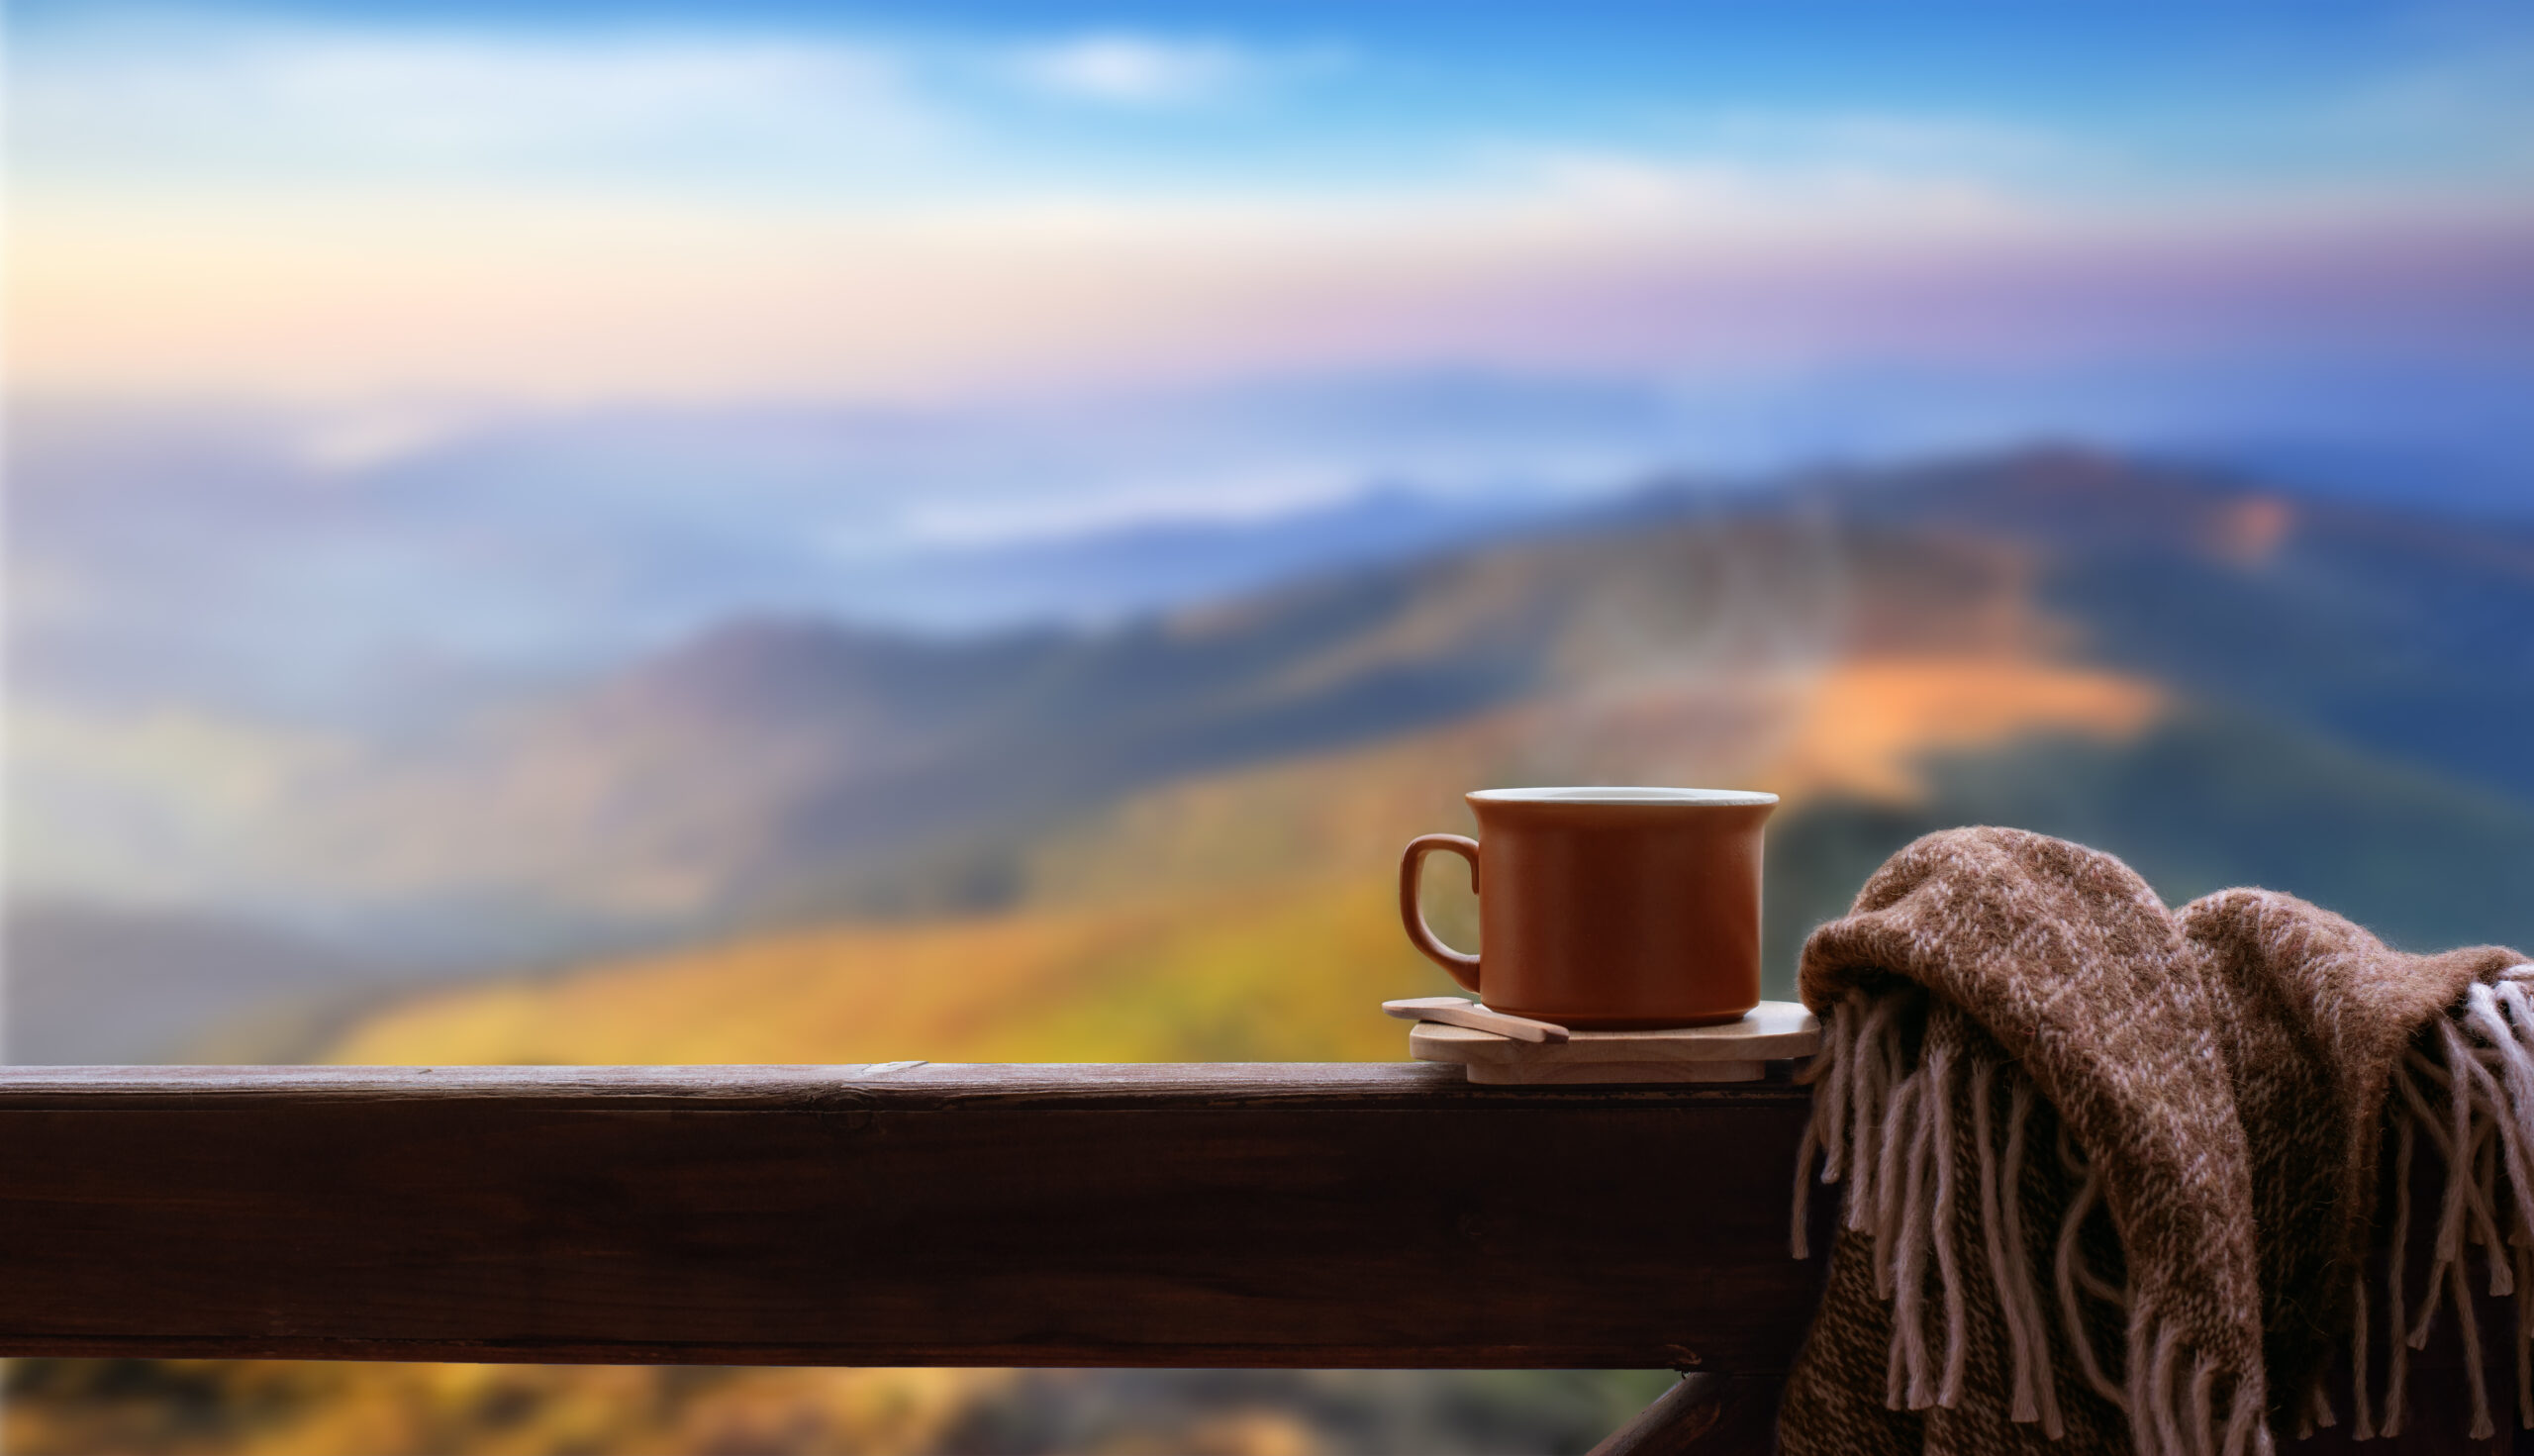 Hot cup of tea or coffee on the wooden railing on the mountains background.